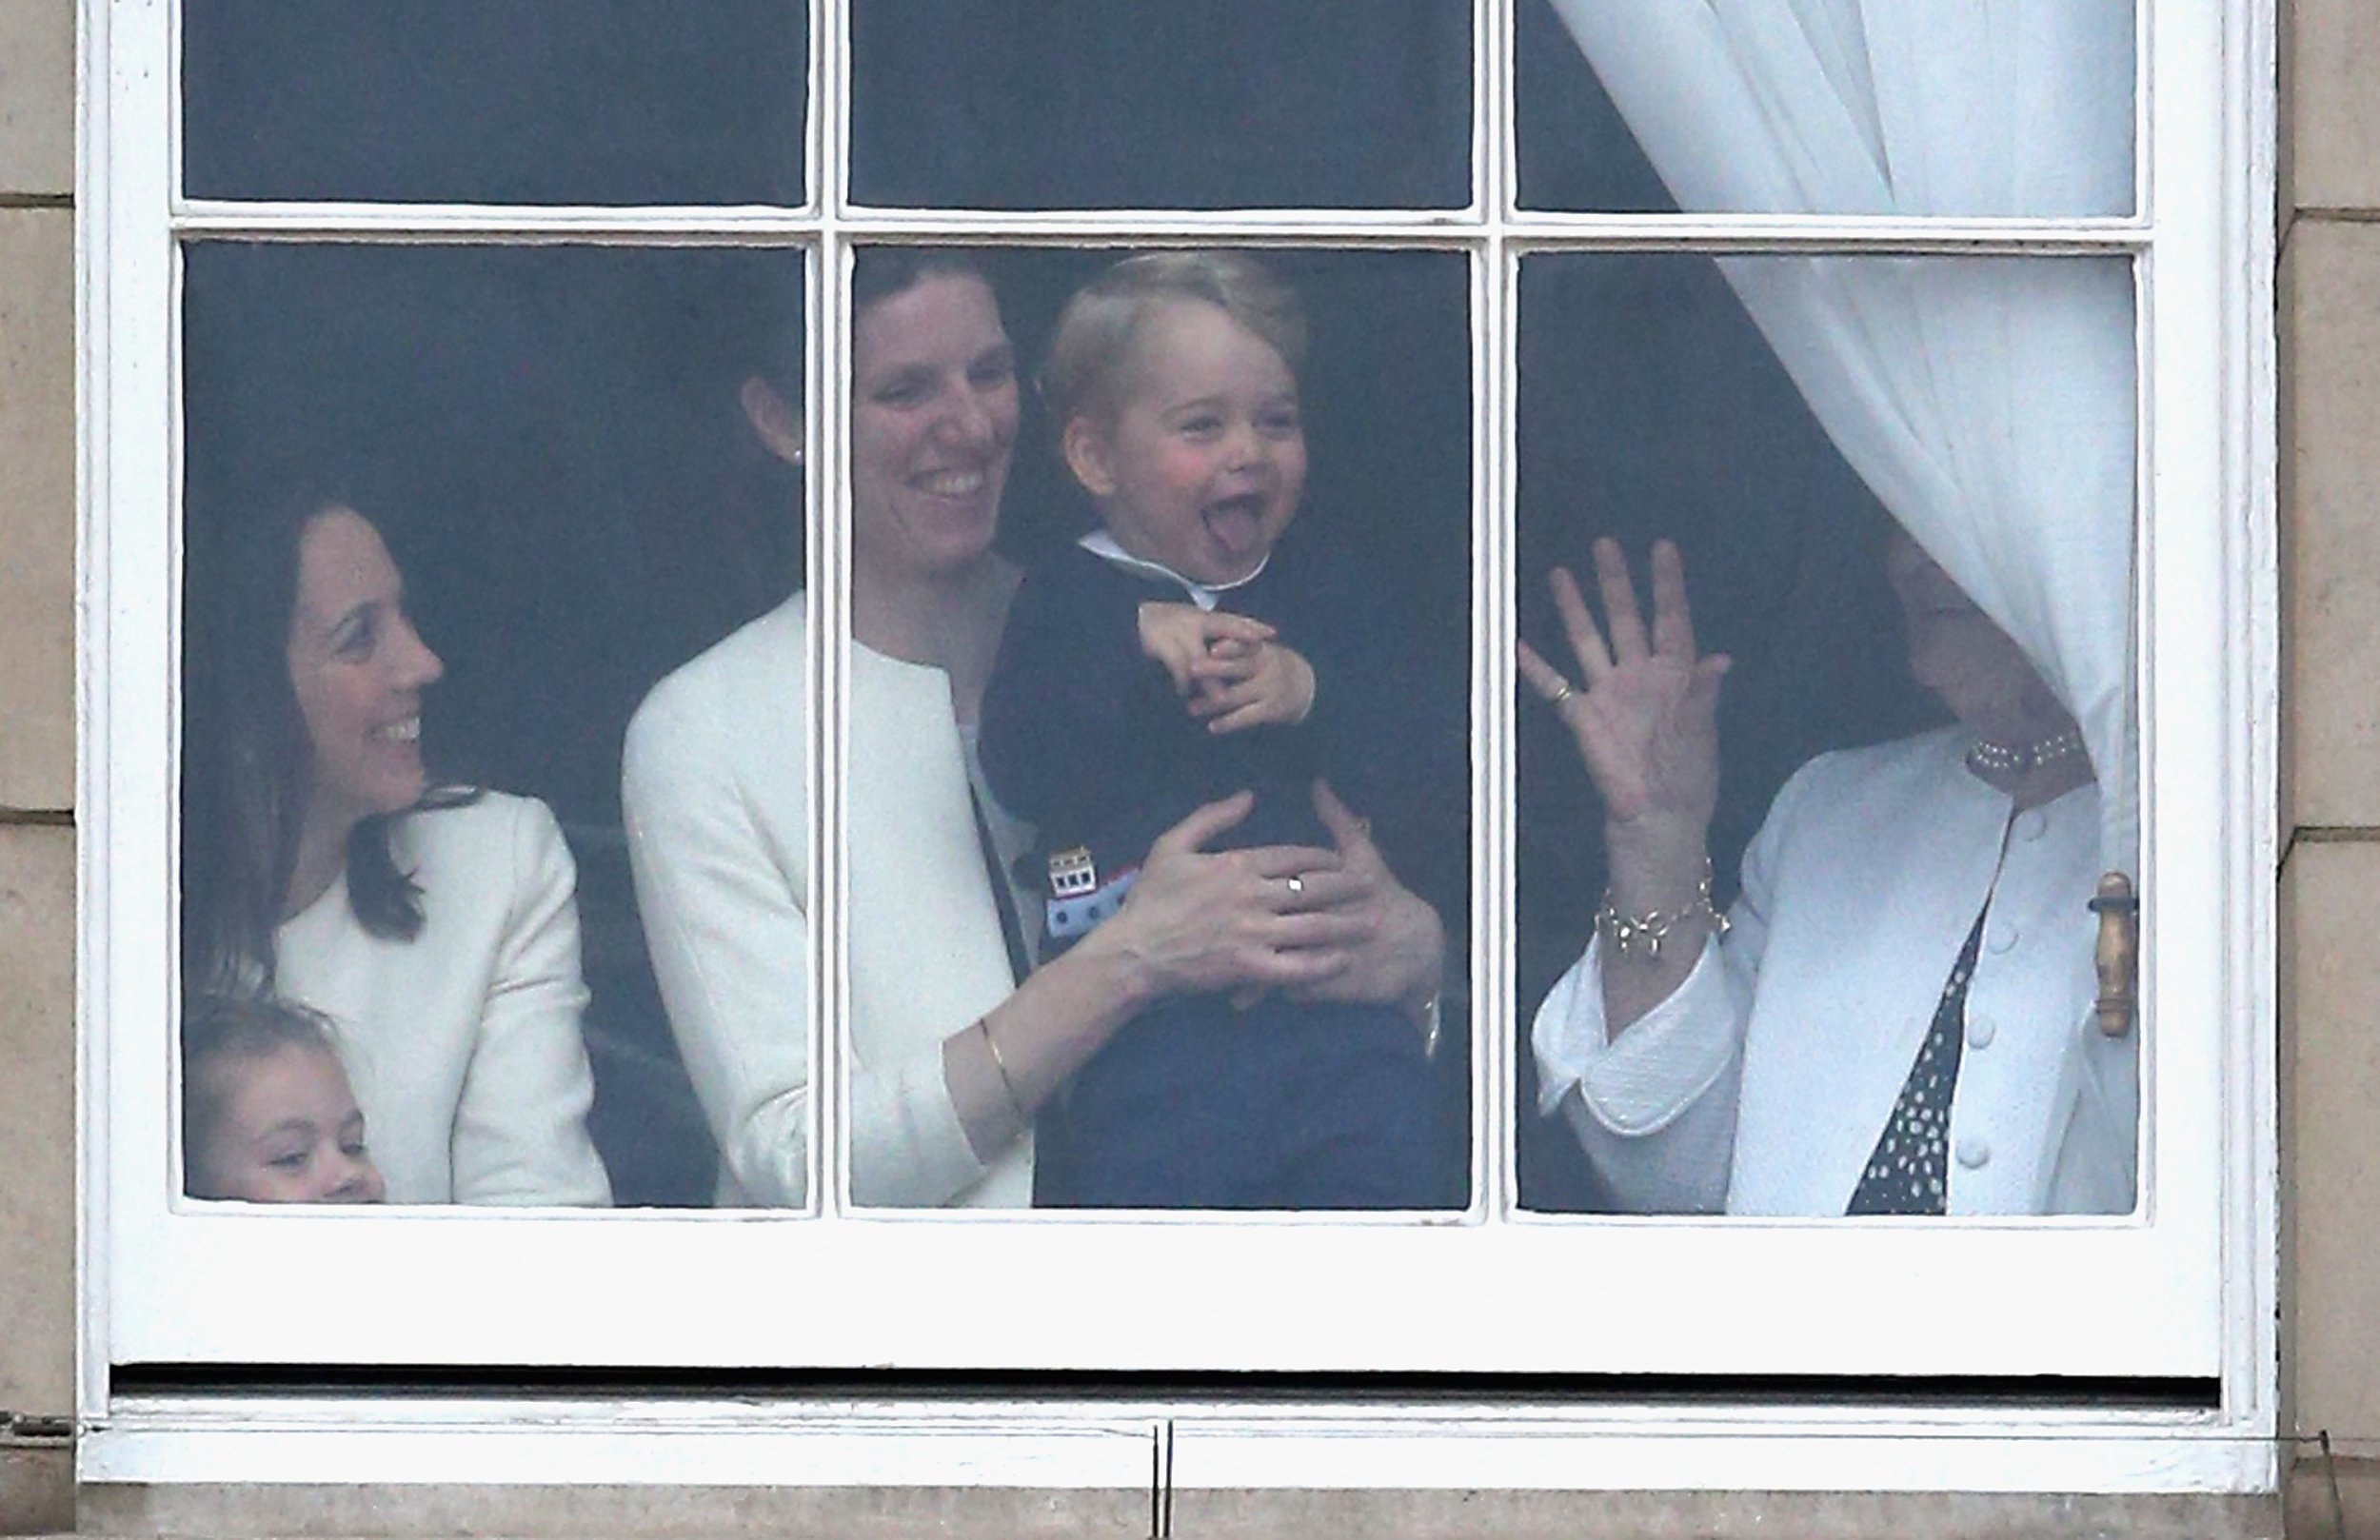 Prince George and his nanny